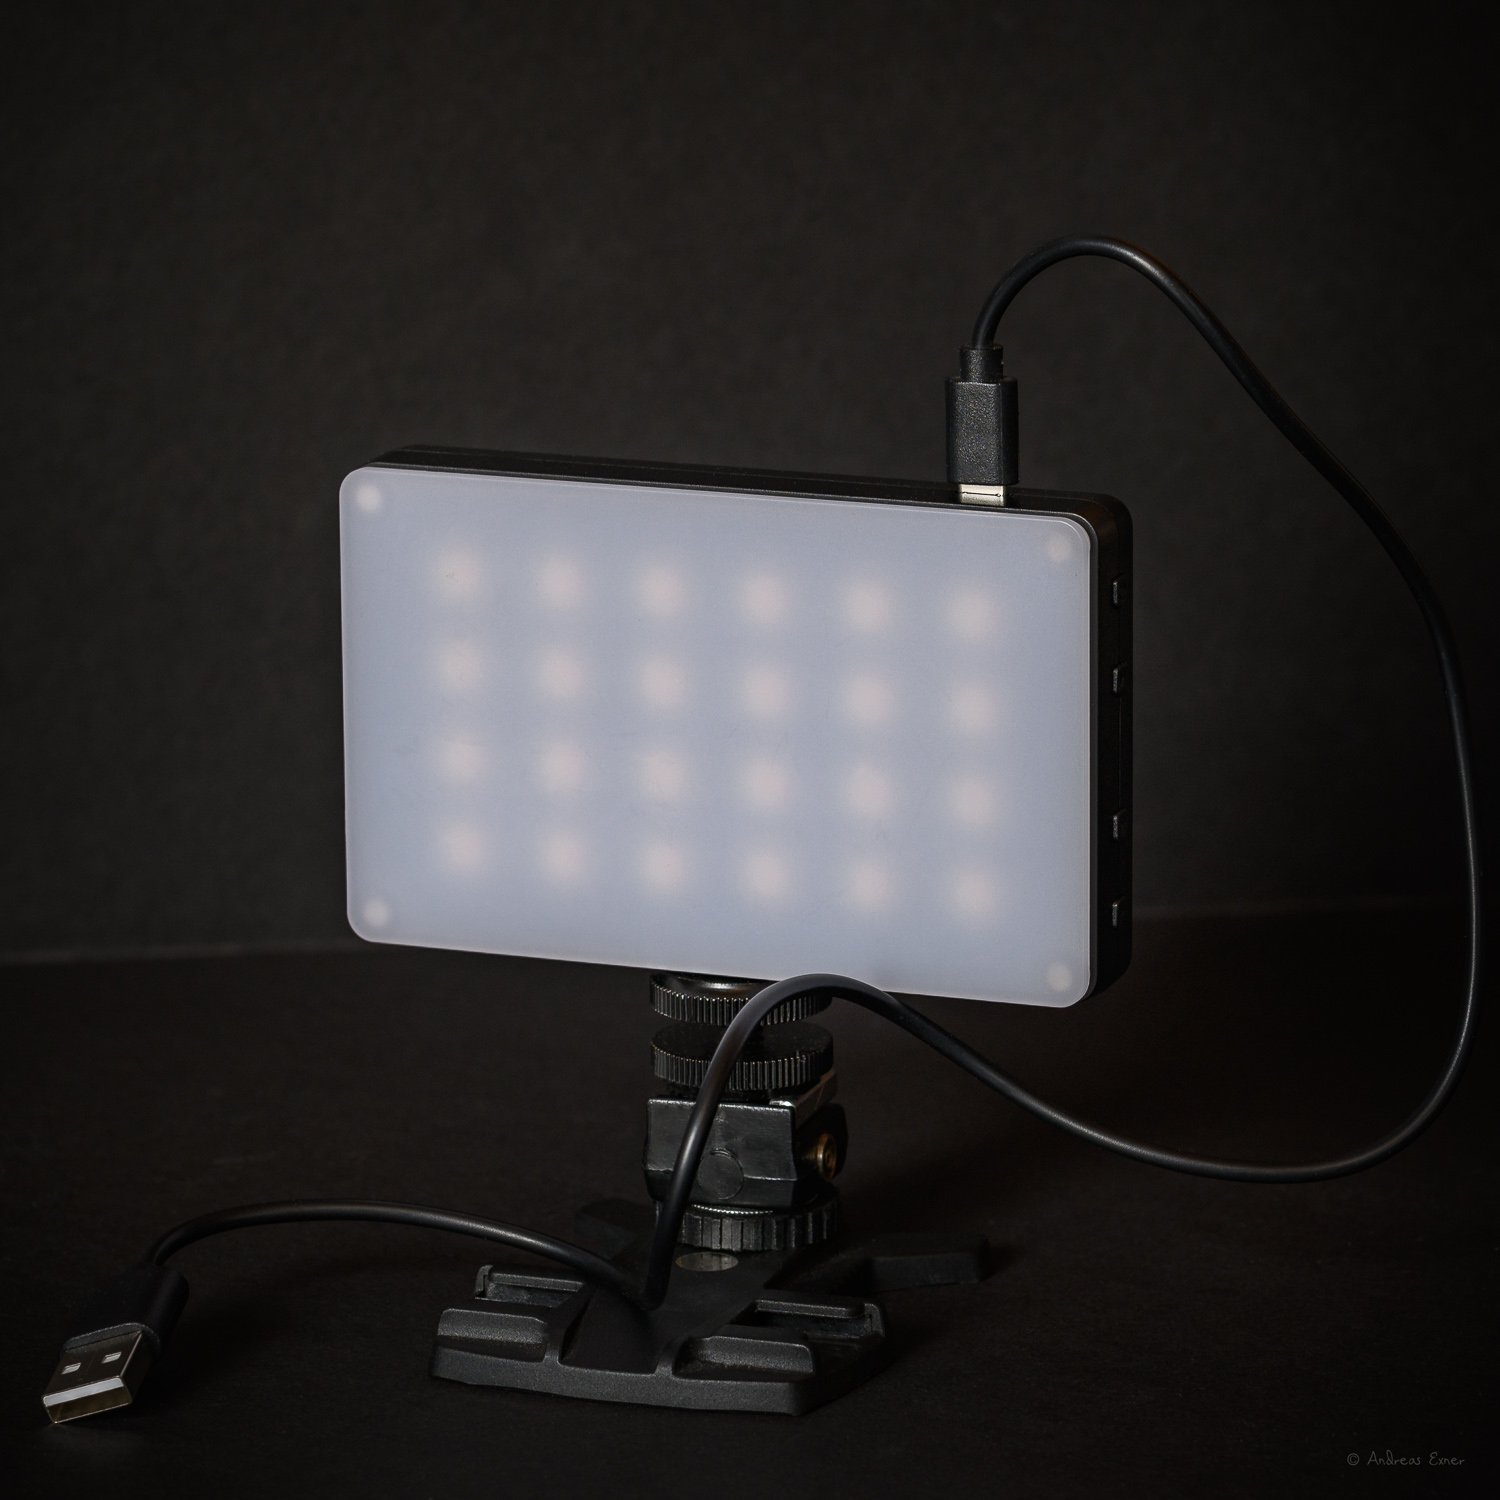  Viltrox RB08 Bicolor LED Light  This small LED light has a color temperature range between 2500K and 8500K and is dimmable between 10% and 100%. I use it for detail shots in nature photography, like mushrooms or blossoms (see an example by clicking 